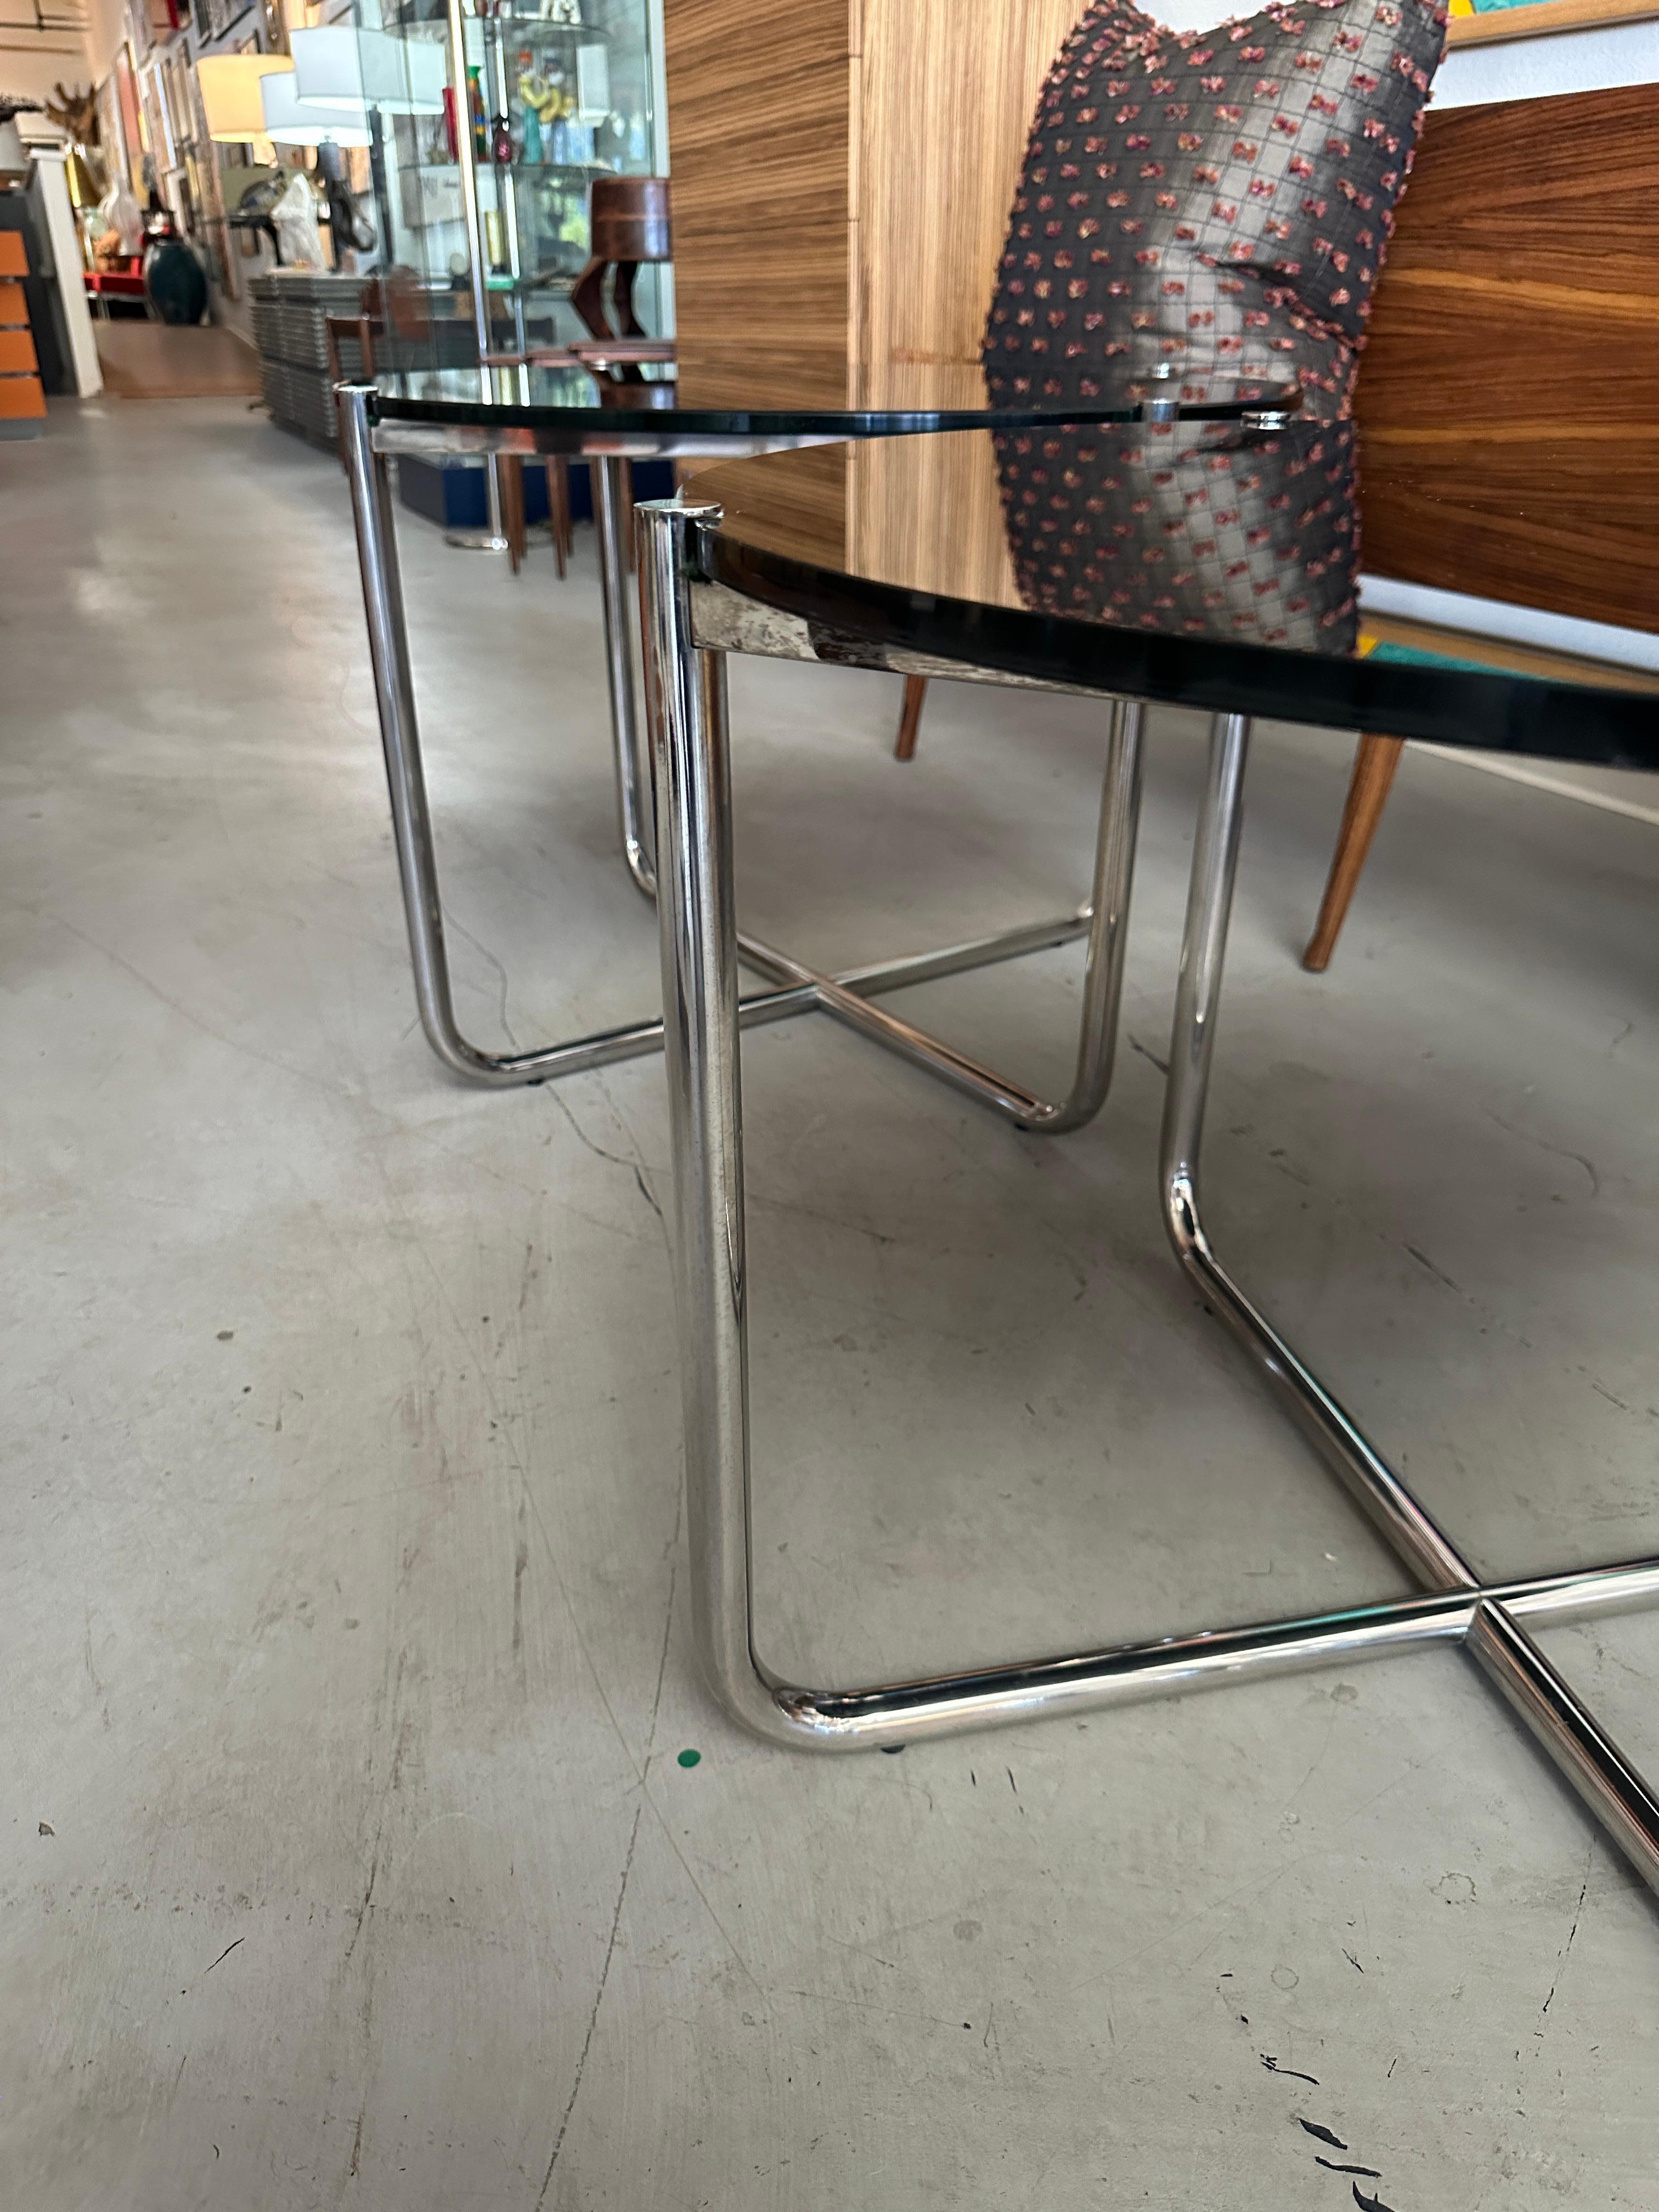 A beautiful pair of vintage 1980’s Knoll Mies van der Rohe MR tables with black glass. Chromed steel legs. One table has an intact Knoll Made in Italy label, the other has a partial remnant. The glass is in good clean condition, with only a few